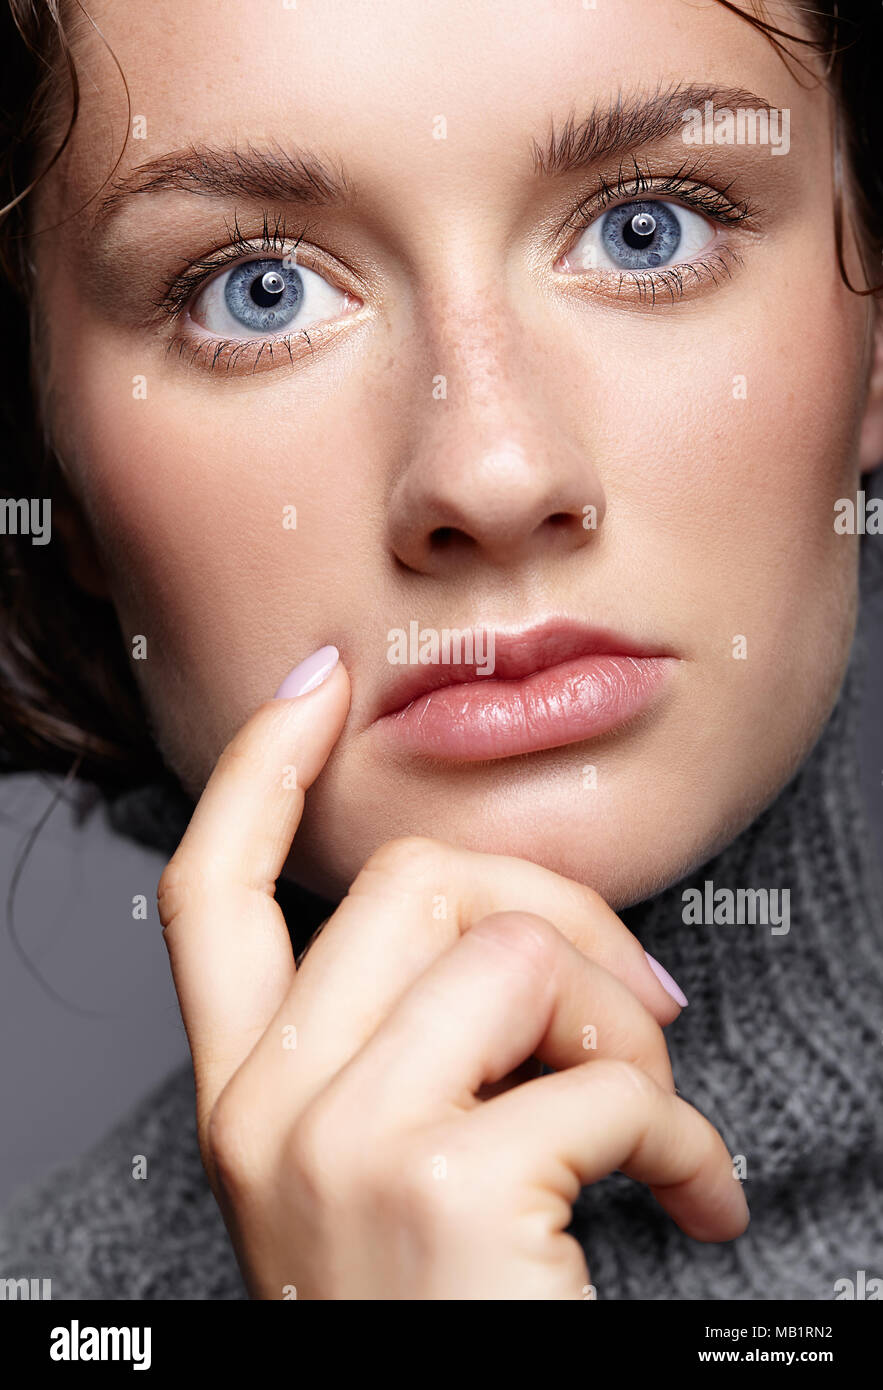 Beauty portrait of young woman in gray wool sweater. Brunette girl with bright blue eyes and day female makeup. Stock Photo